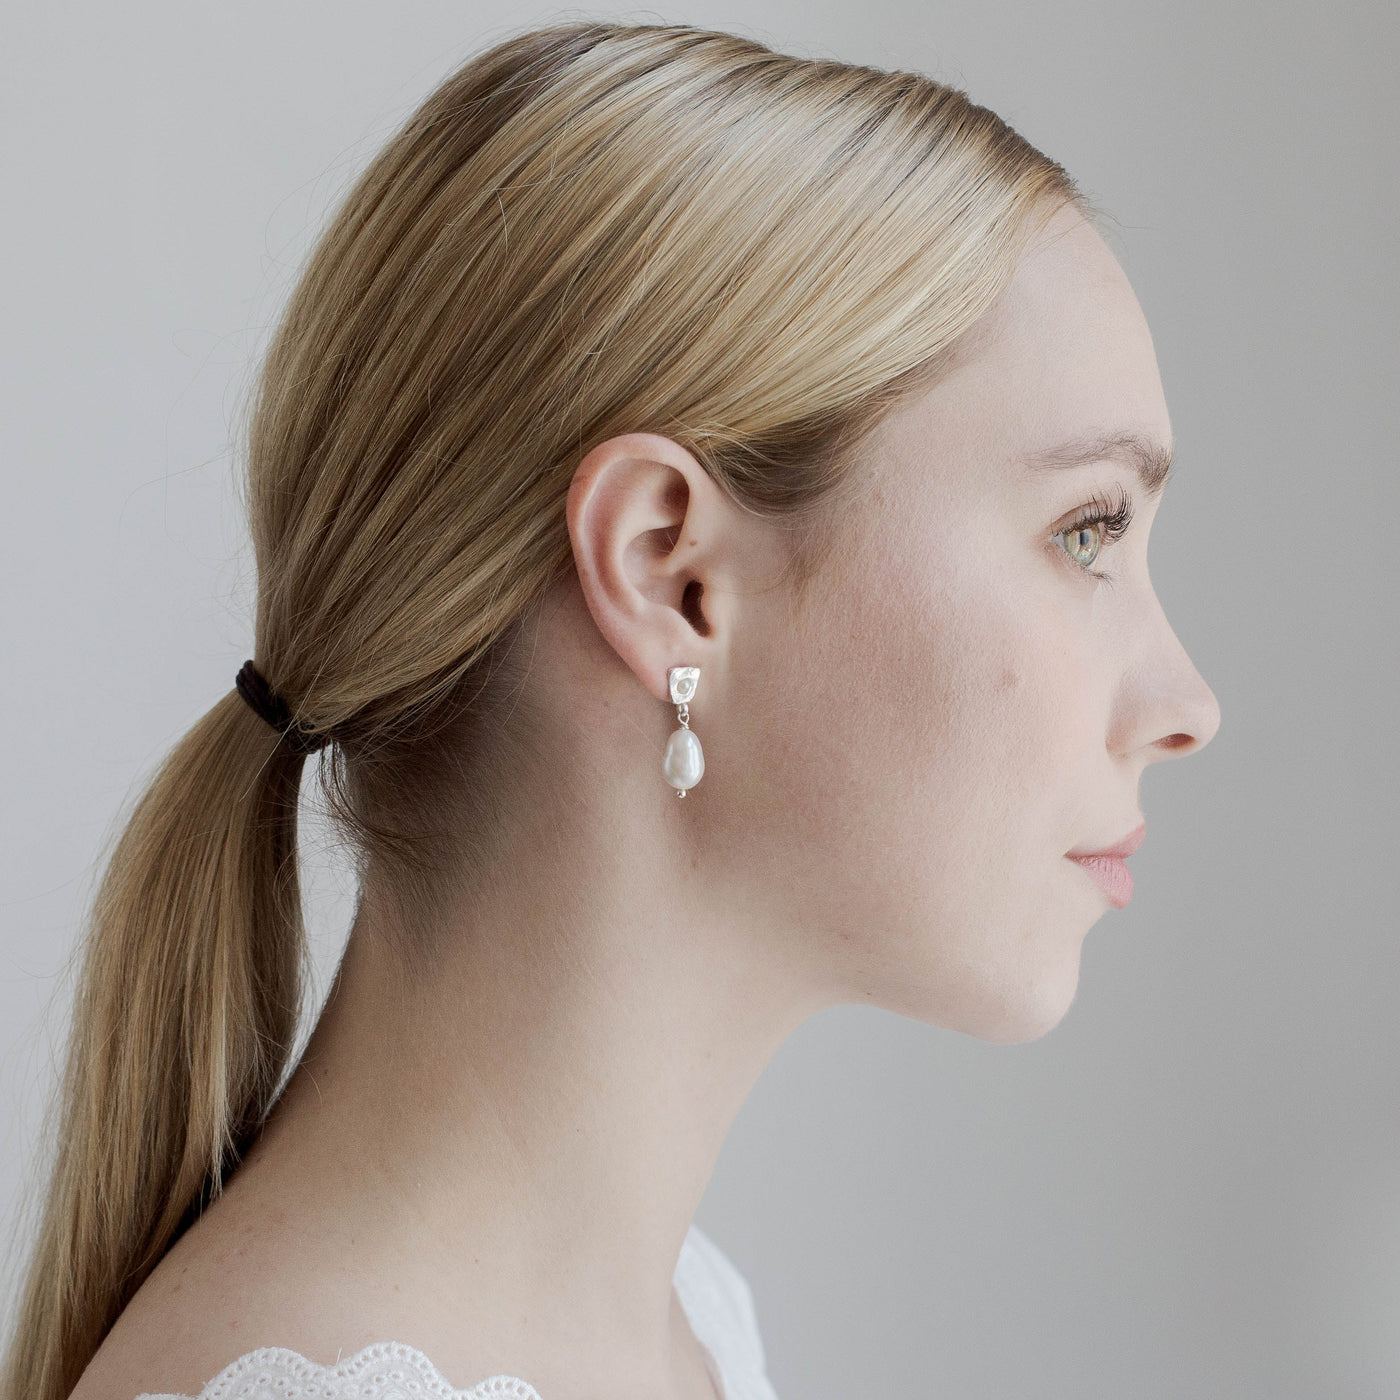 FALKEVIKA // Subtle ear studs made of fine silver with delicate baroque pearls